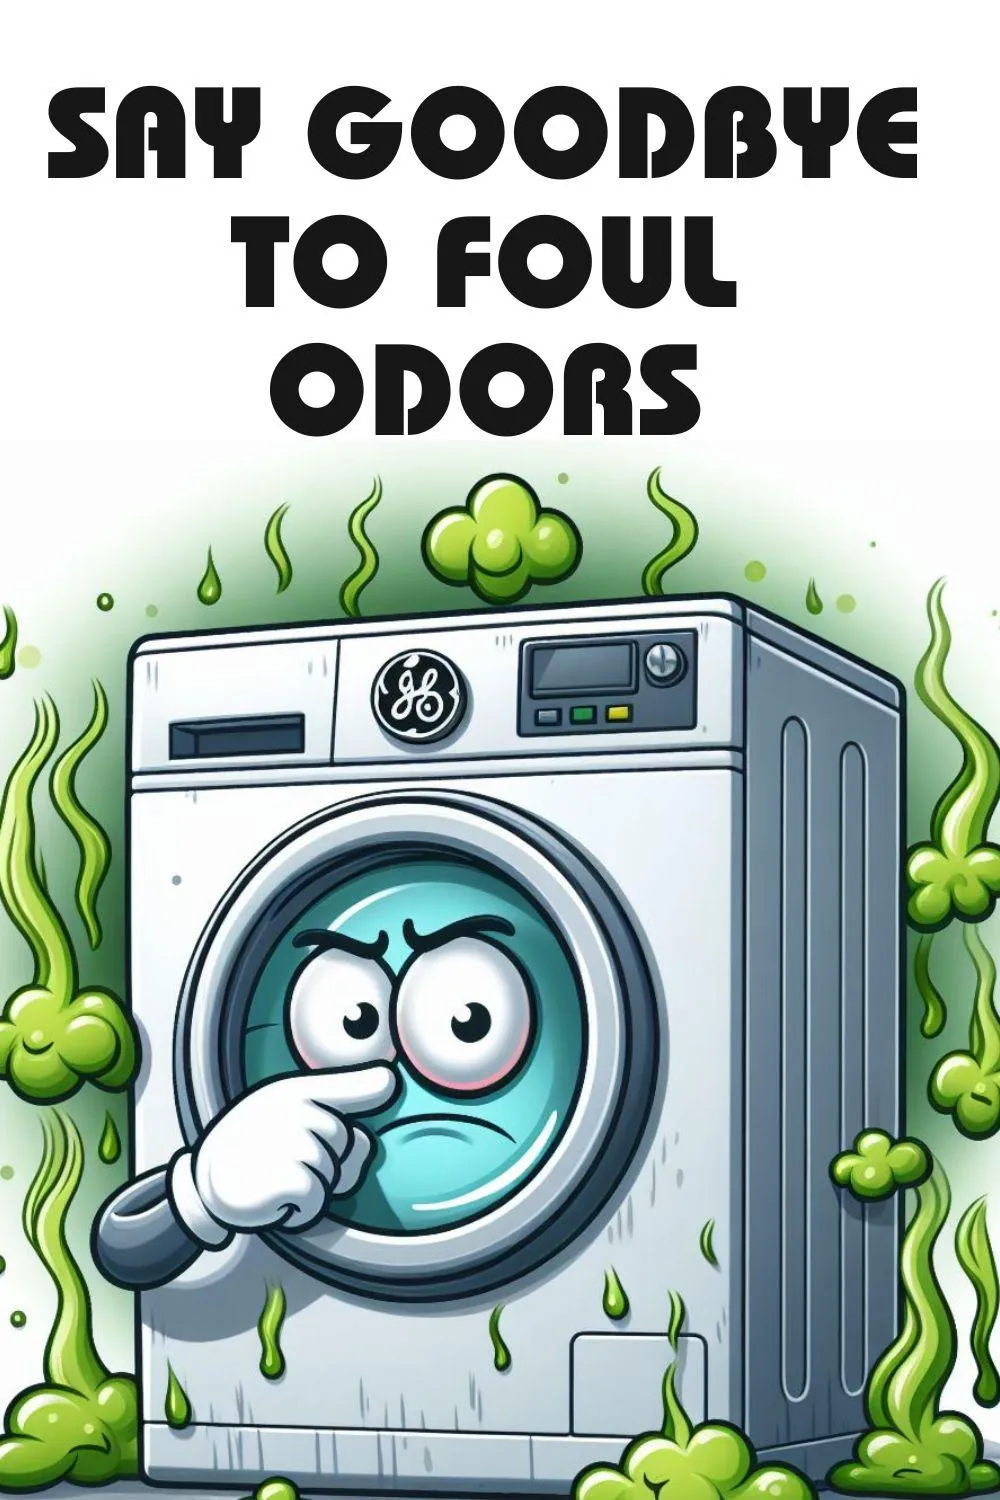 Freshen Up Your GE Washer: Beat Foul Odors!